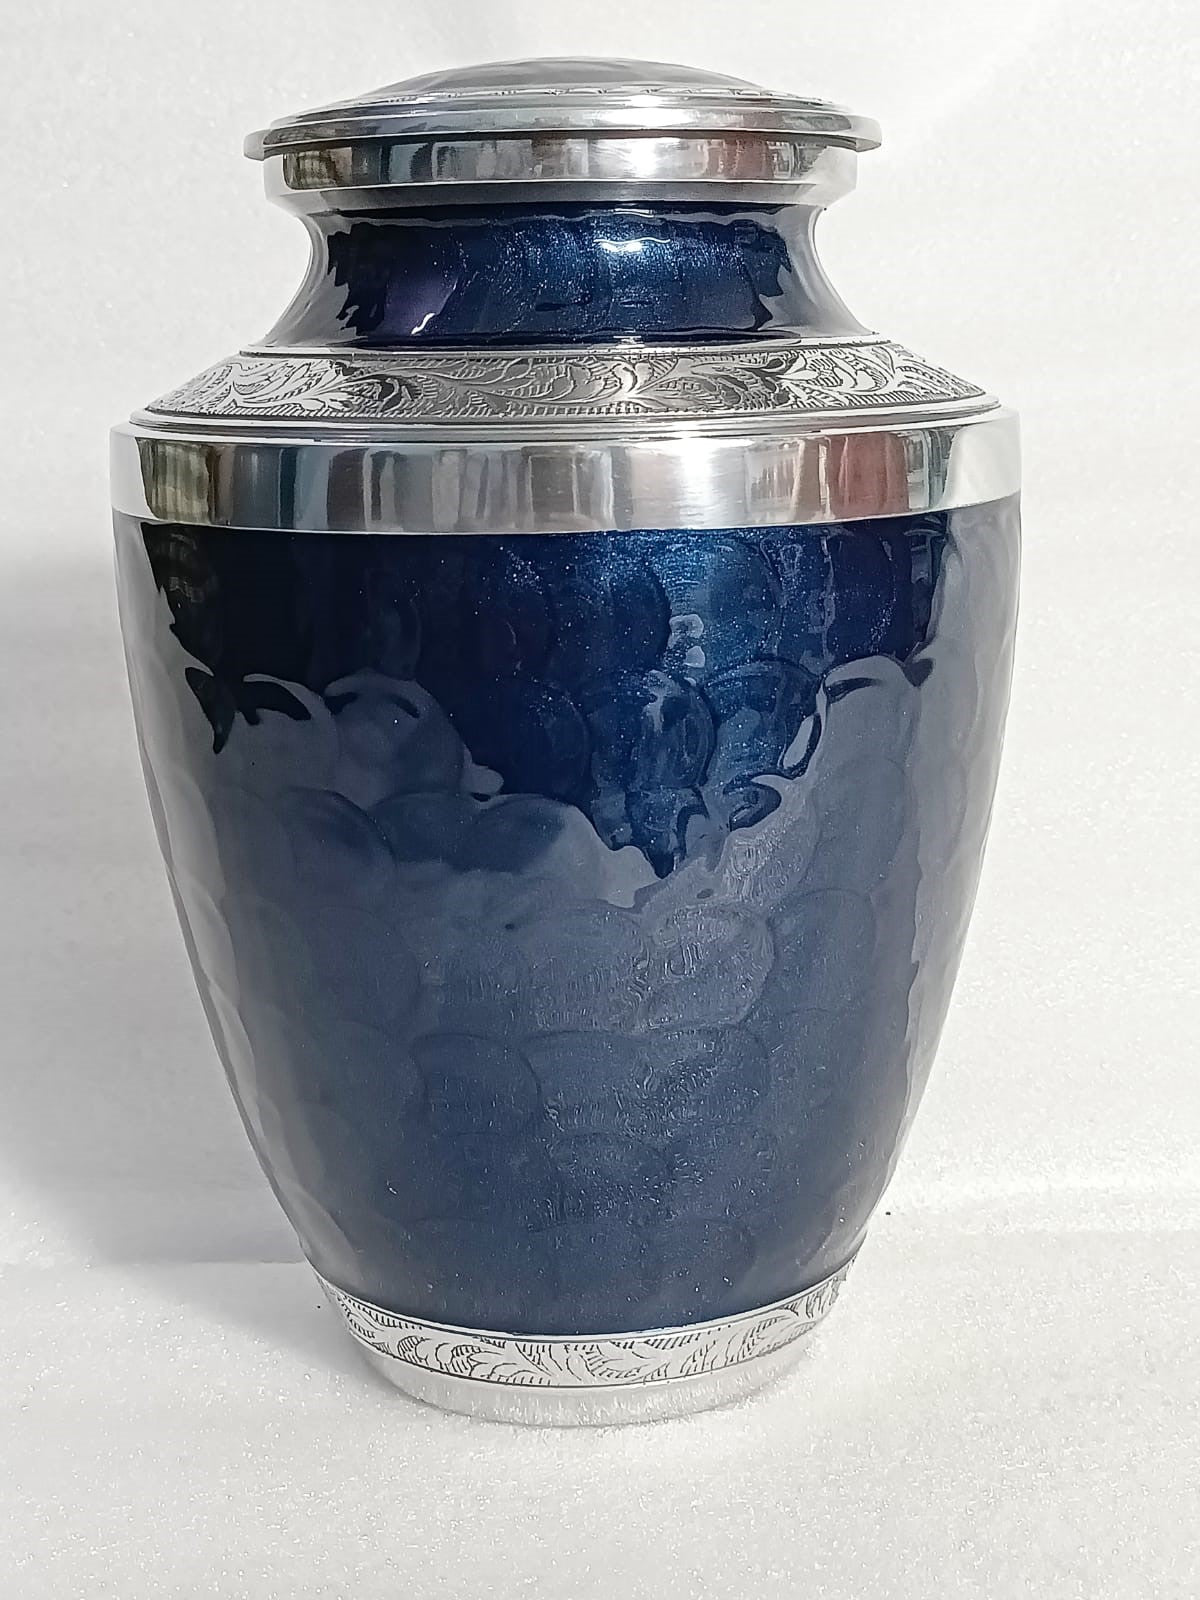 Stella Adult Ashes Urn-Adult Urn for Ashes-Cremation Urns- The cremation urns for ashes and keepsakes for ashes come in a variety of styles to suit most tastes, decor and different volumes of funeral ashes.